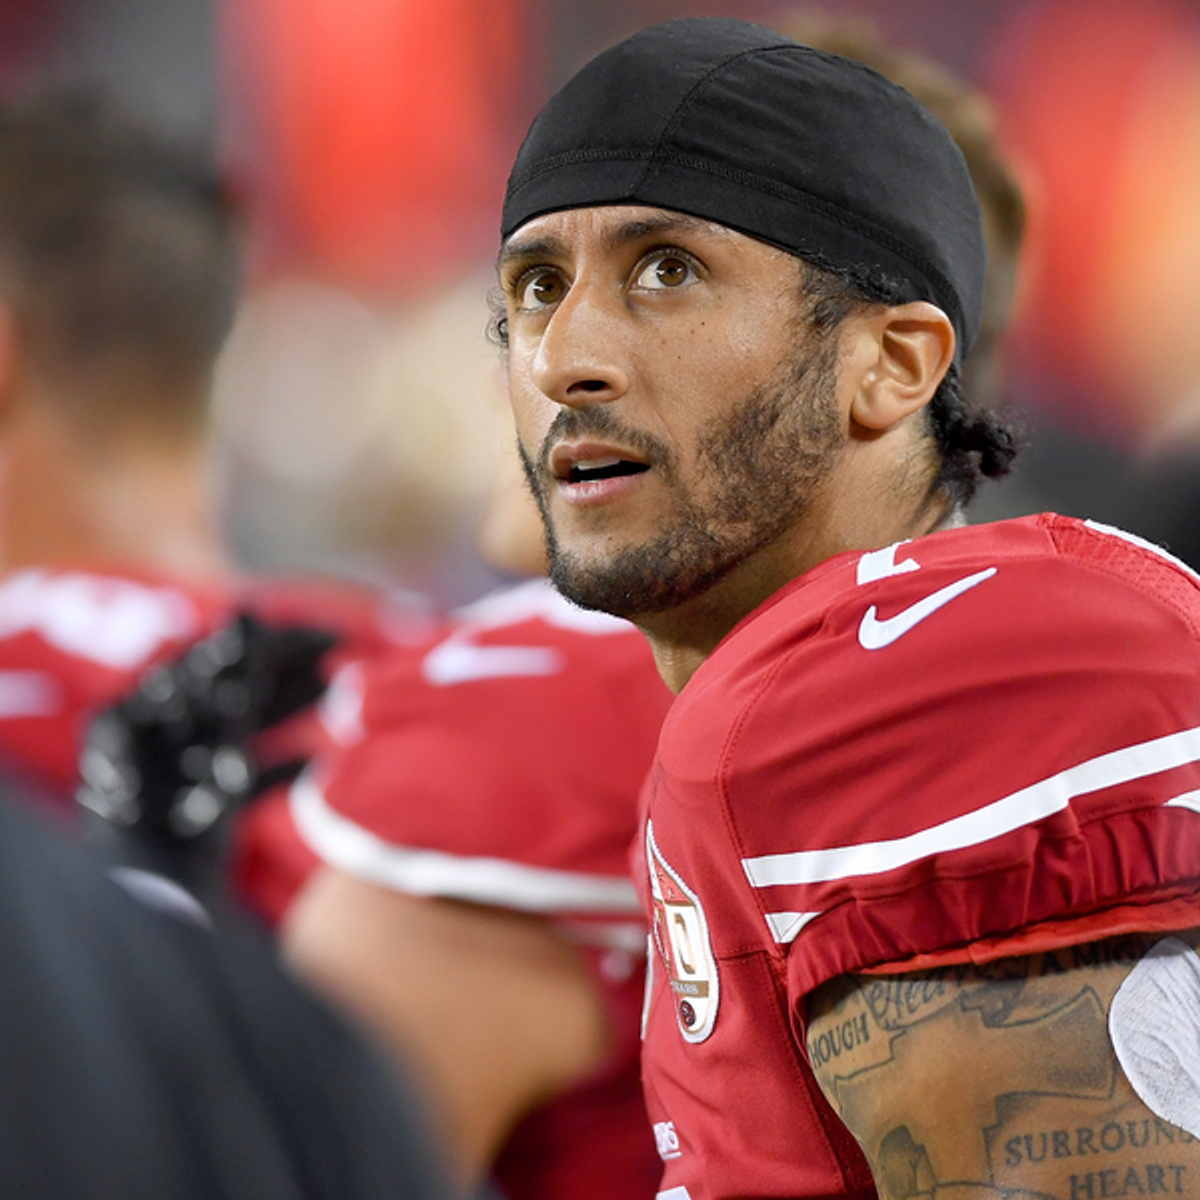 My Take On The Colin Kaepernick Controversy